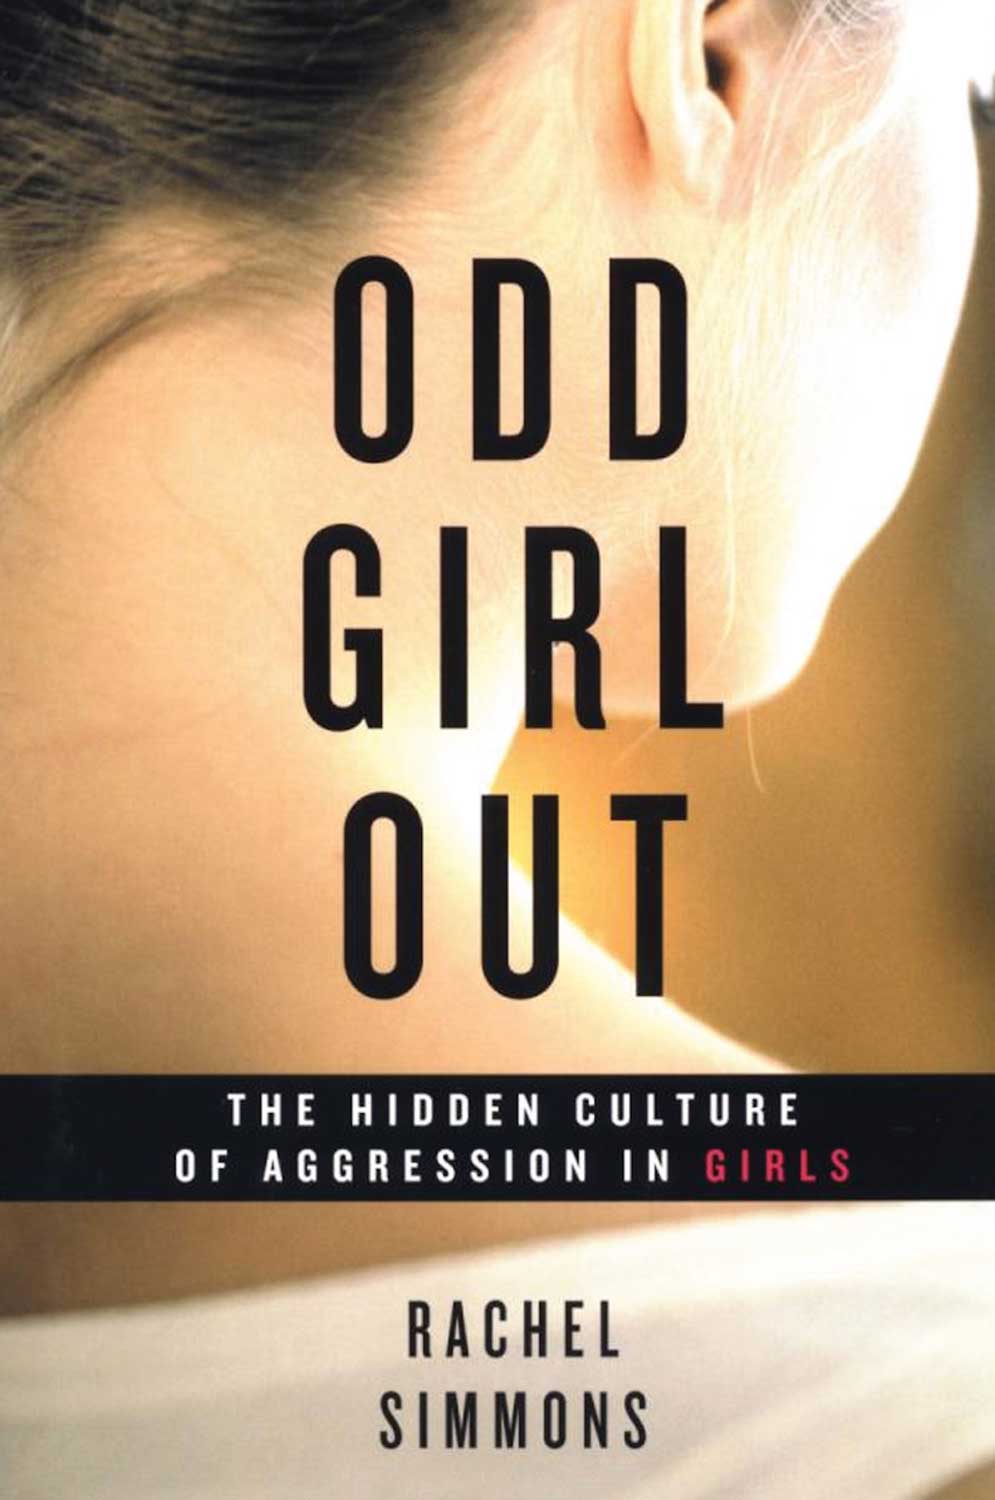 Book cover of the back of a person's head and ear with text that reads: Odd Girl Out, the Hidden Culture of Aggression in Girls, Rachel Simmons.